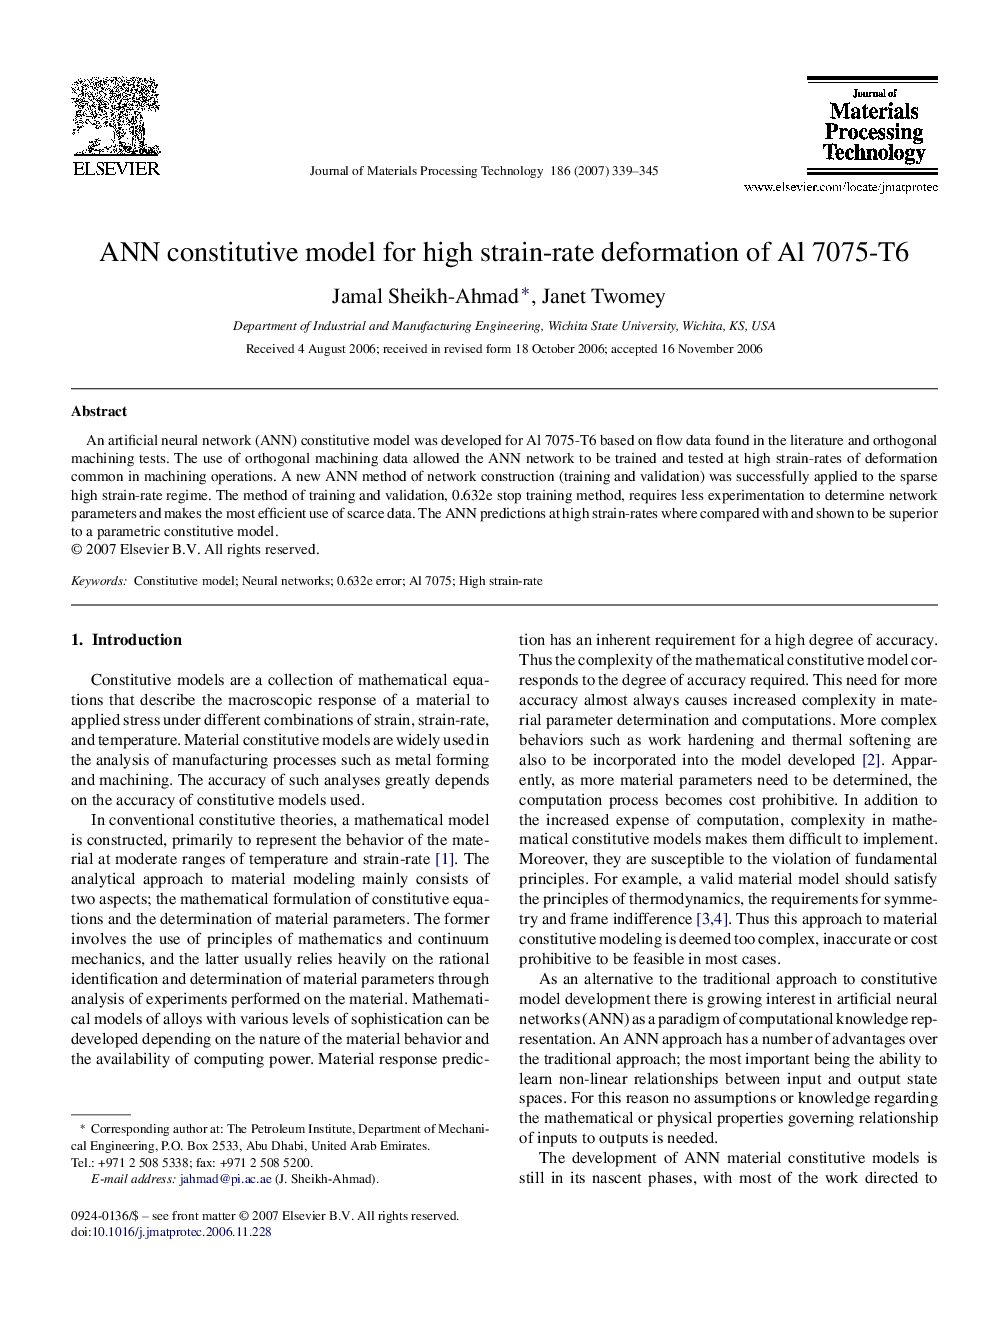 ANN constitutive model for high strain-rate deformation of Al 7075-T6